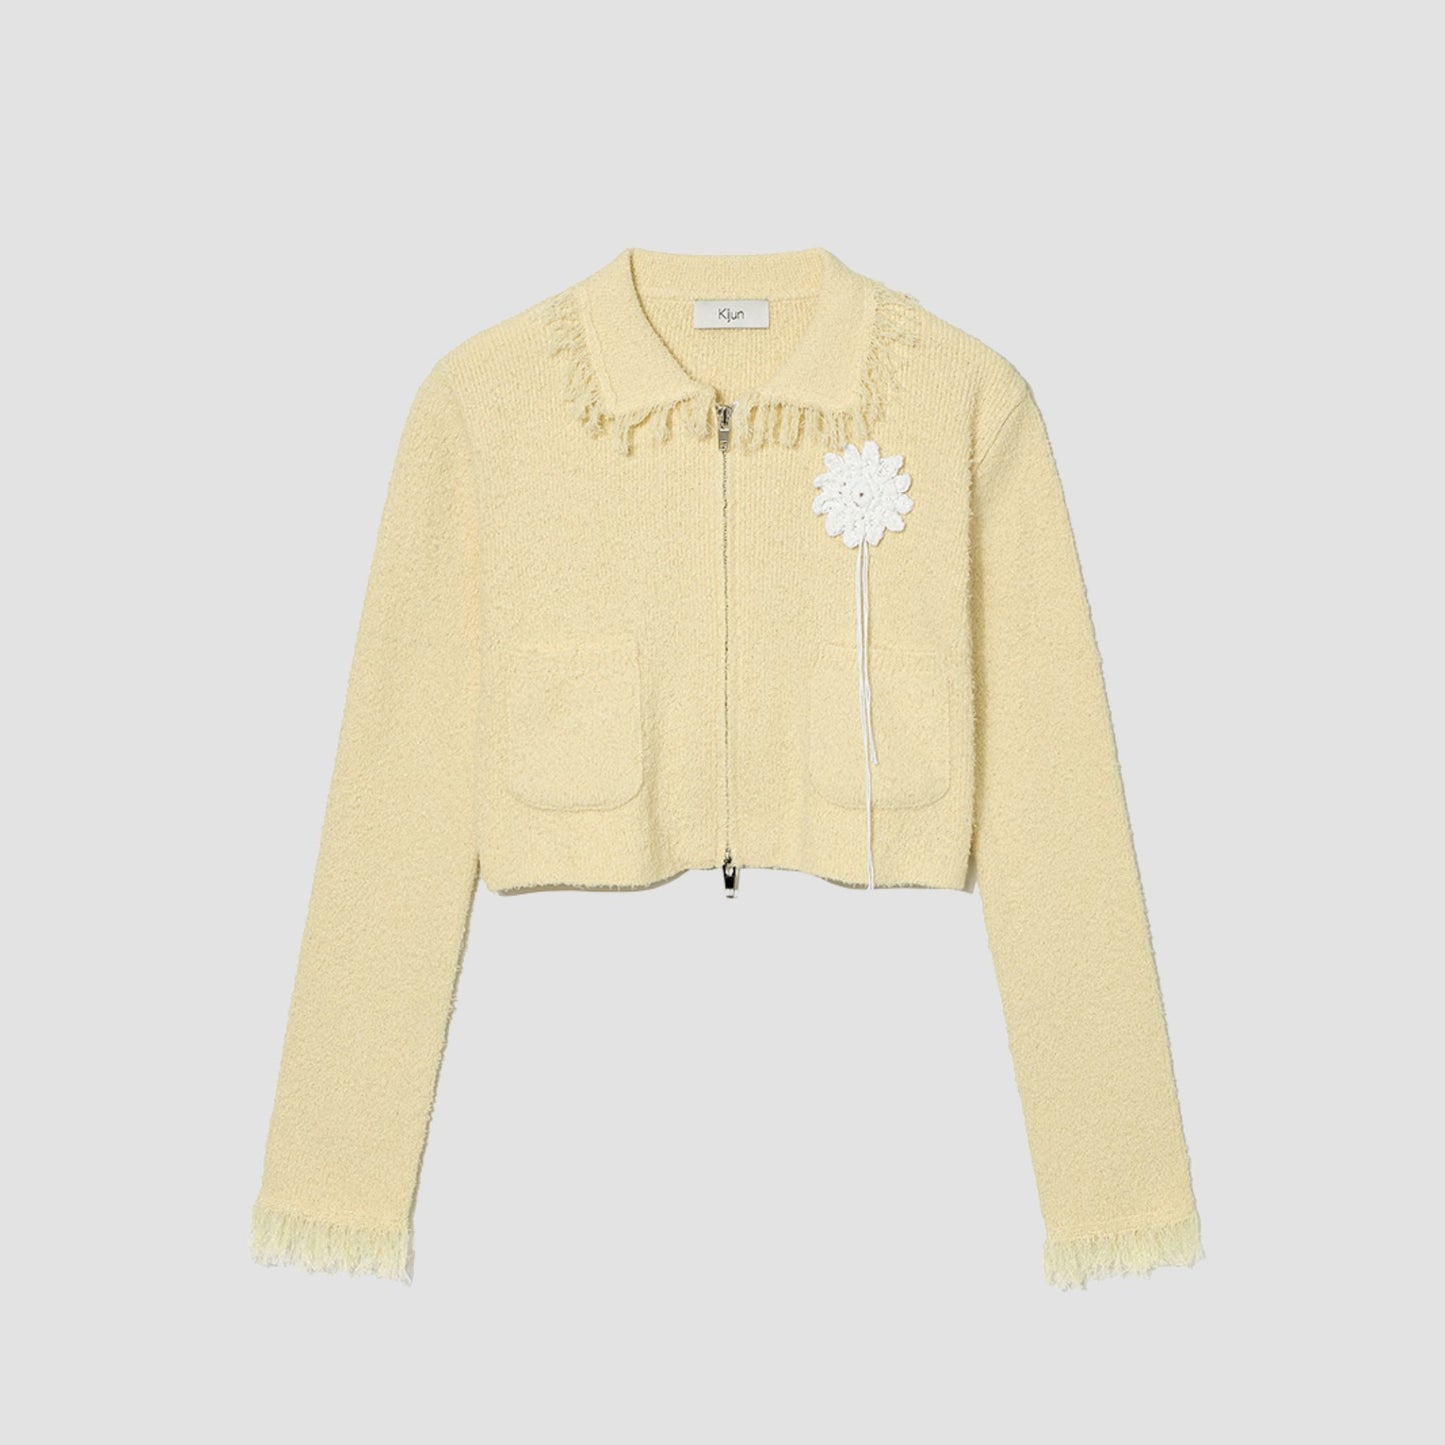 Yellow knit cropped jacket with sun crochet appliqué